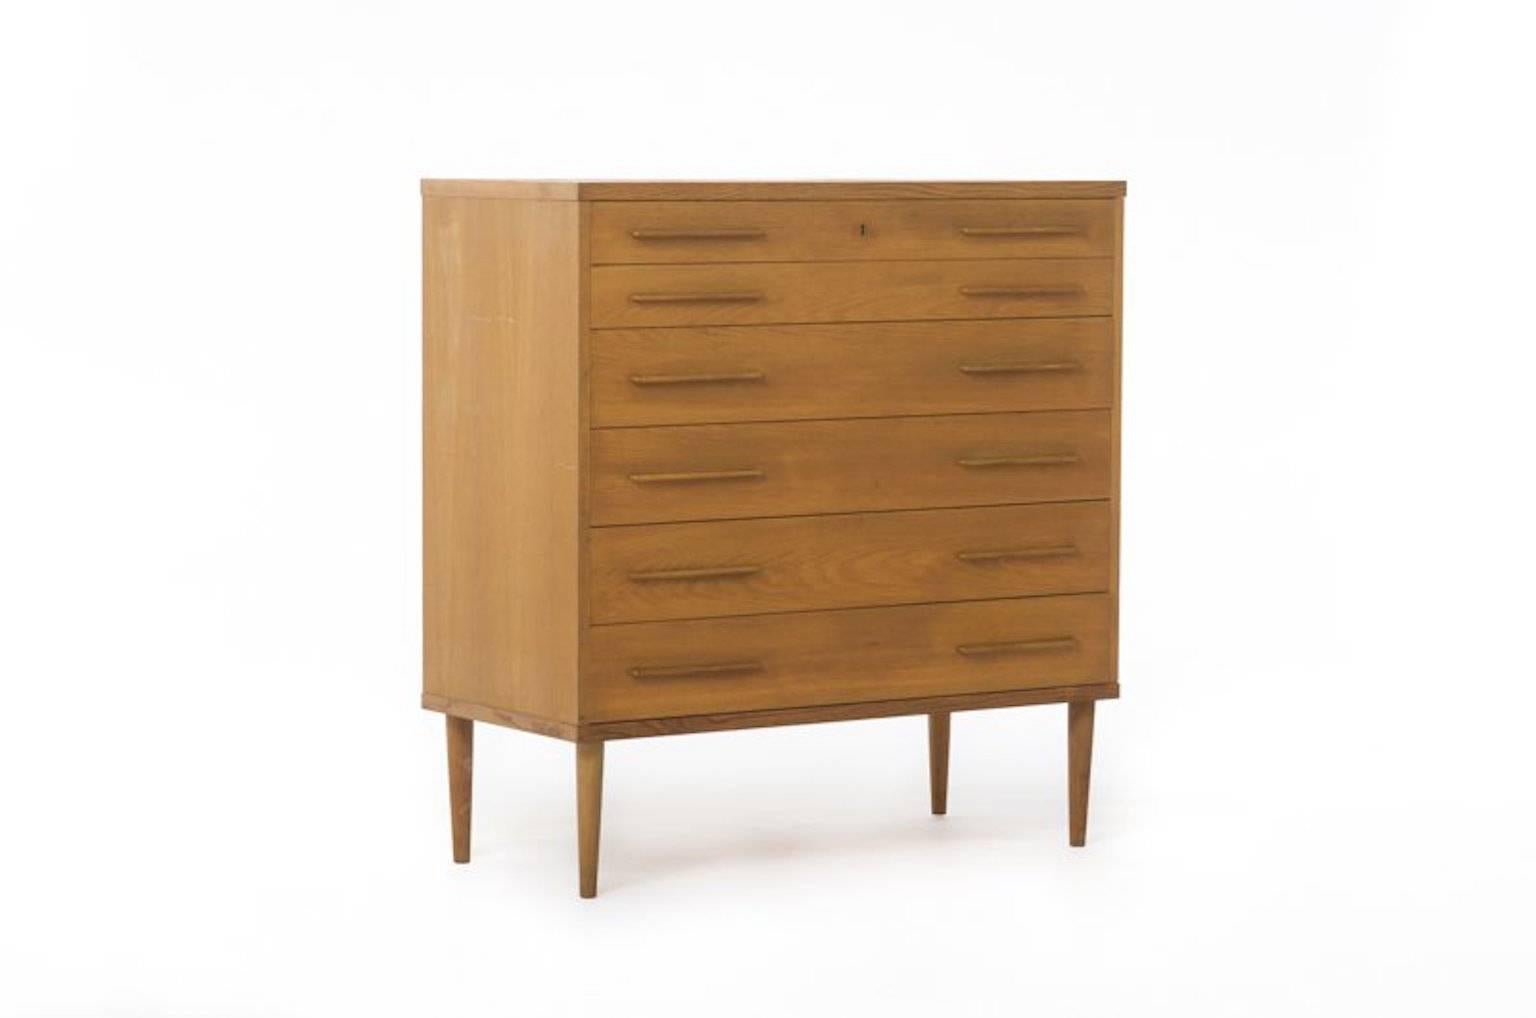 Beautifully restored vintage Danish Modern oak drawer chest.

Professional, skilled furniture restoration is an integral part of what we do every day. Our goal is to provide beautiful, functional furniture that honors its illustrious past. Our